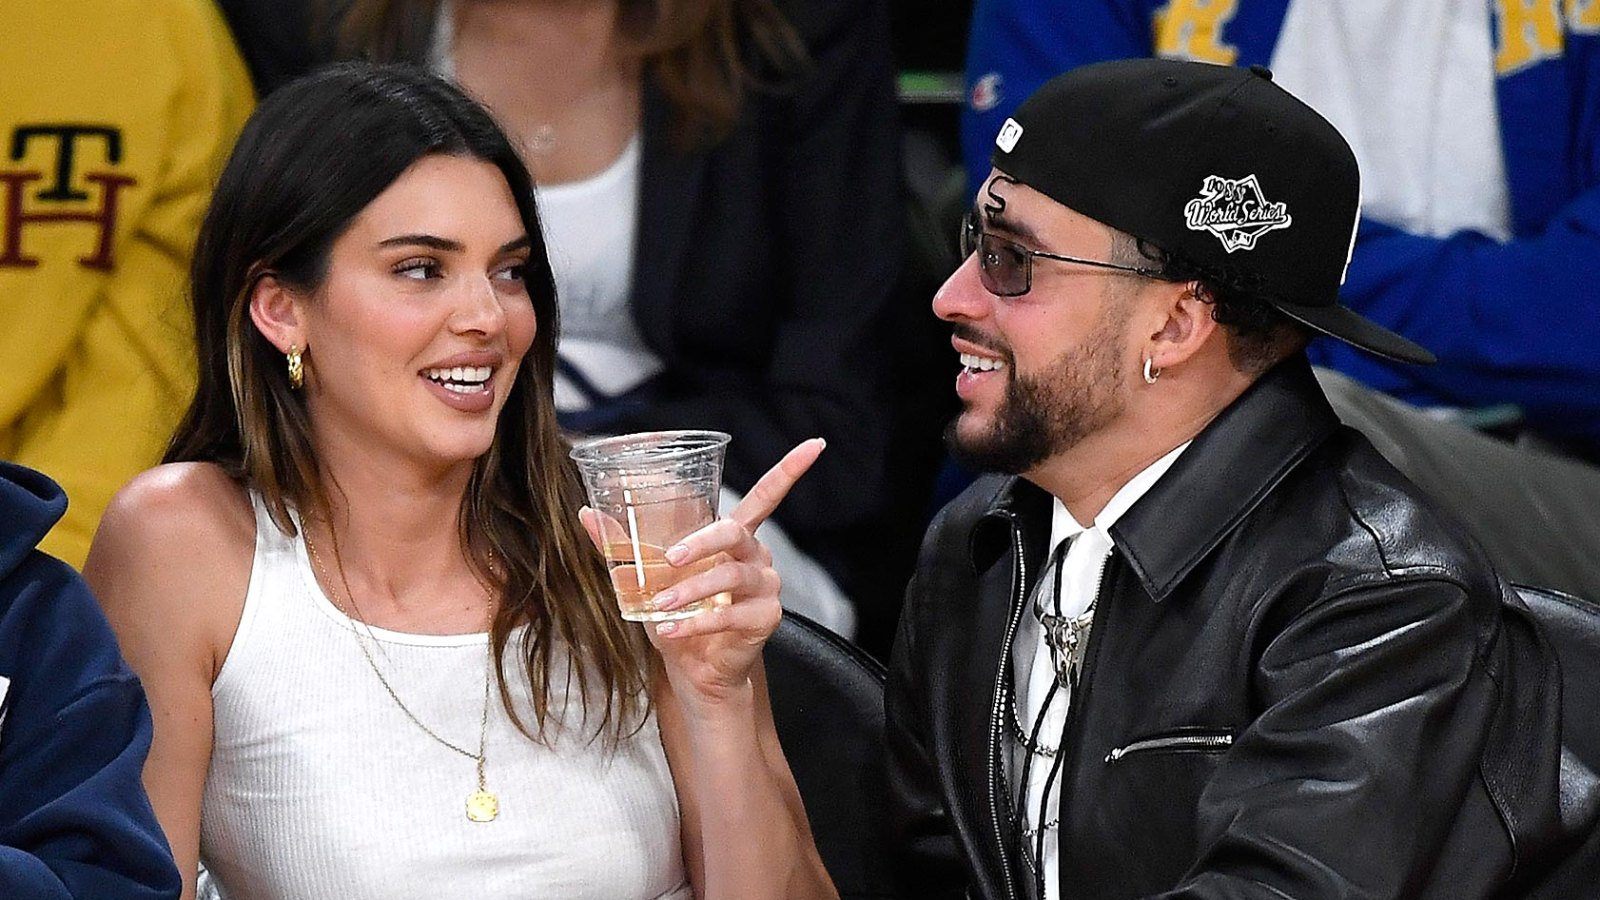 Bad Bunny Wears K Necklace Amid Kendall Jenner Romance